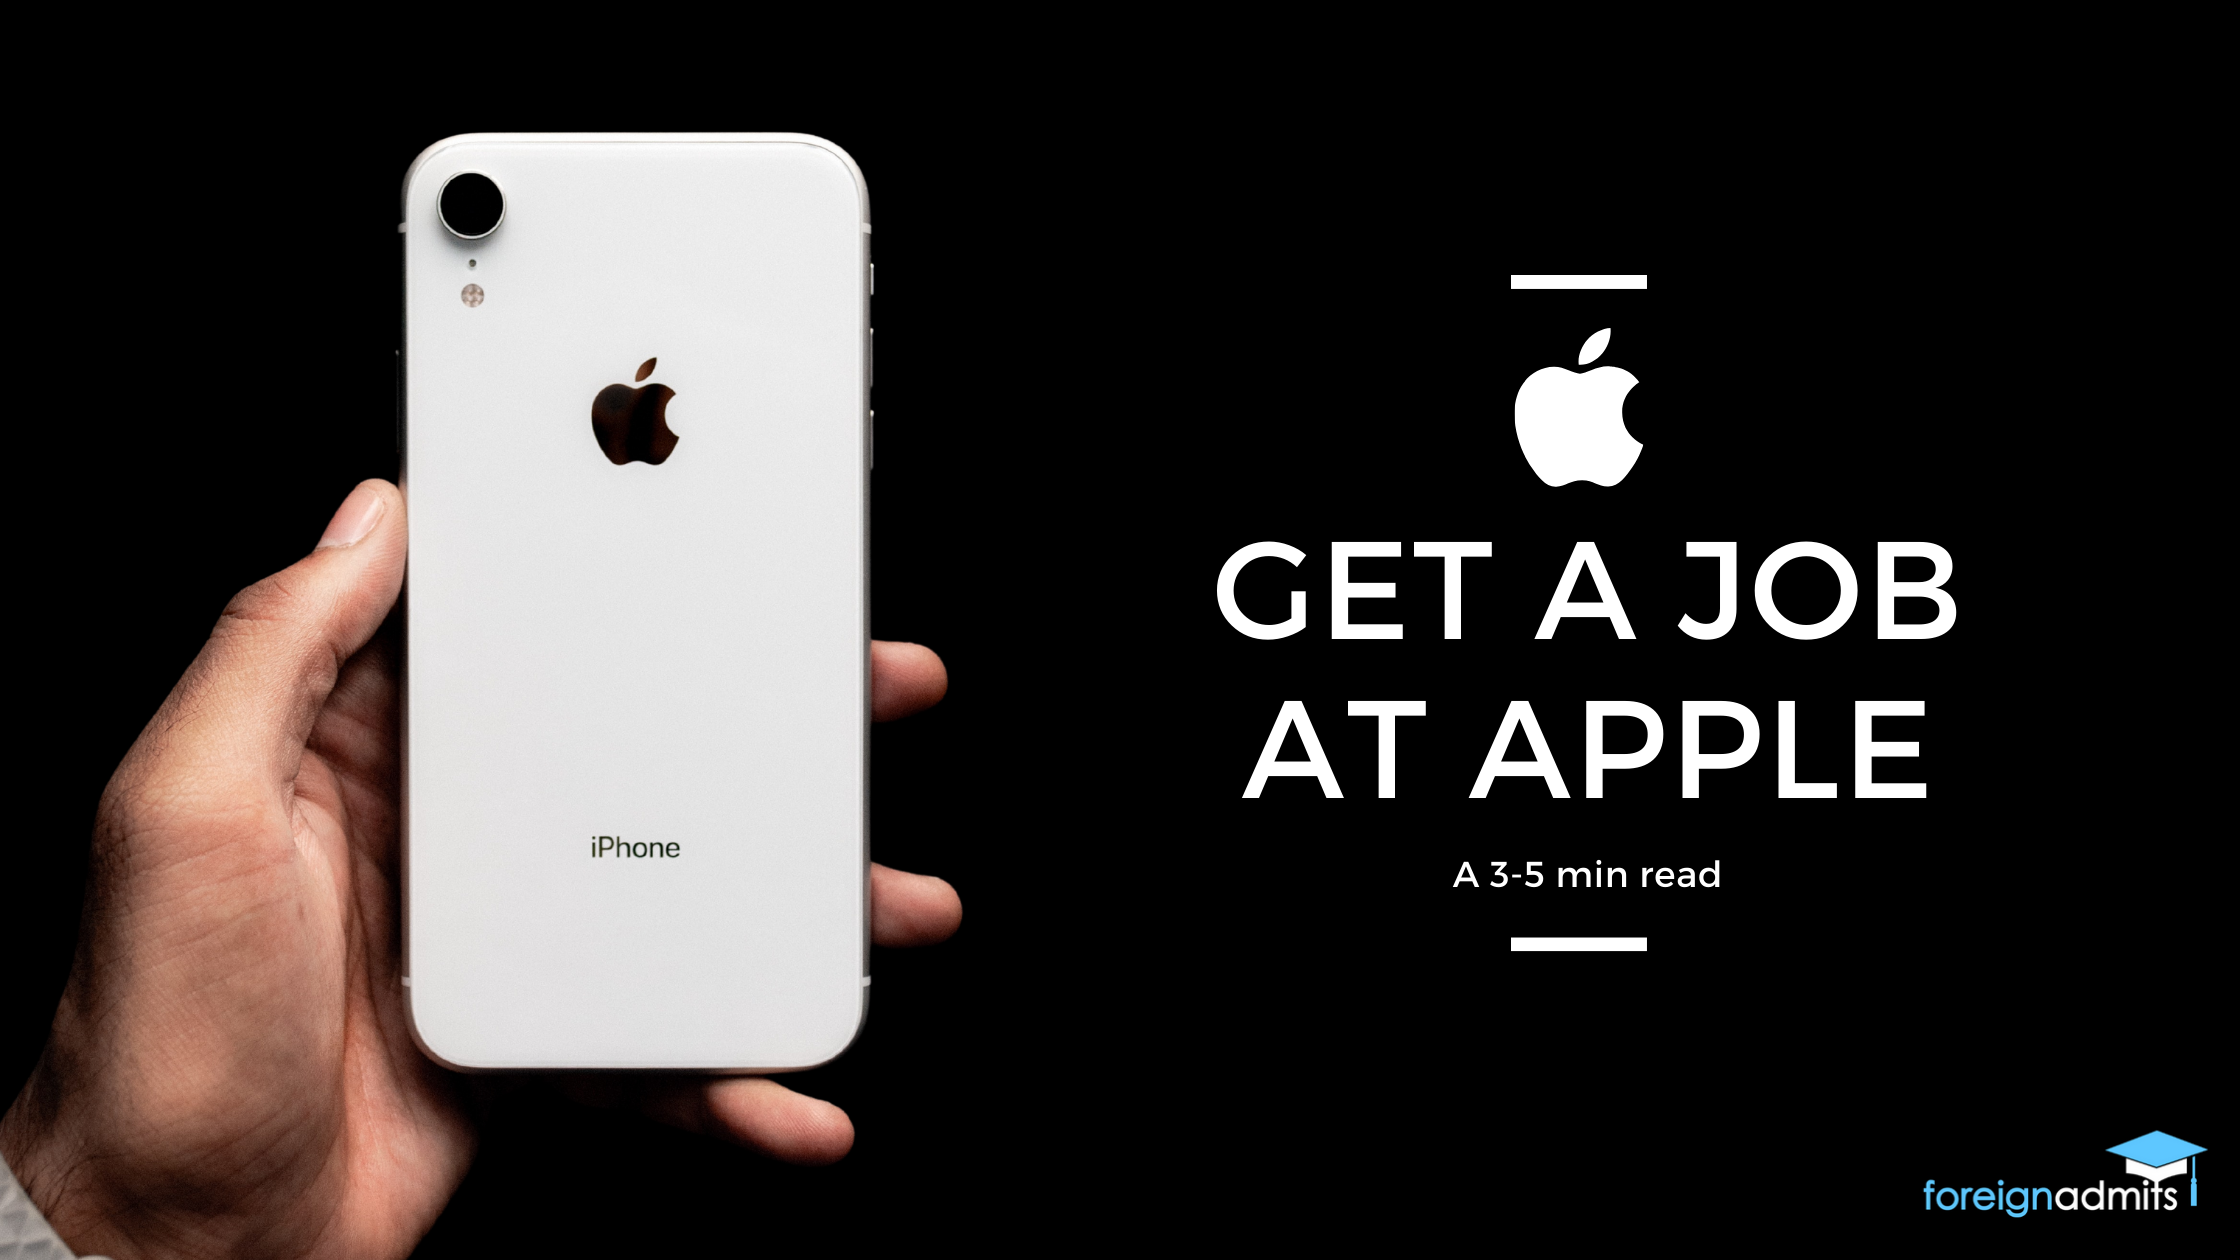 How to get a job at Apple?